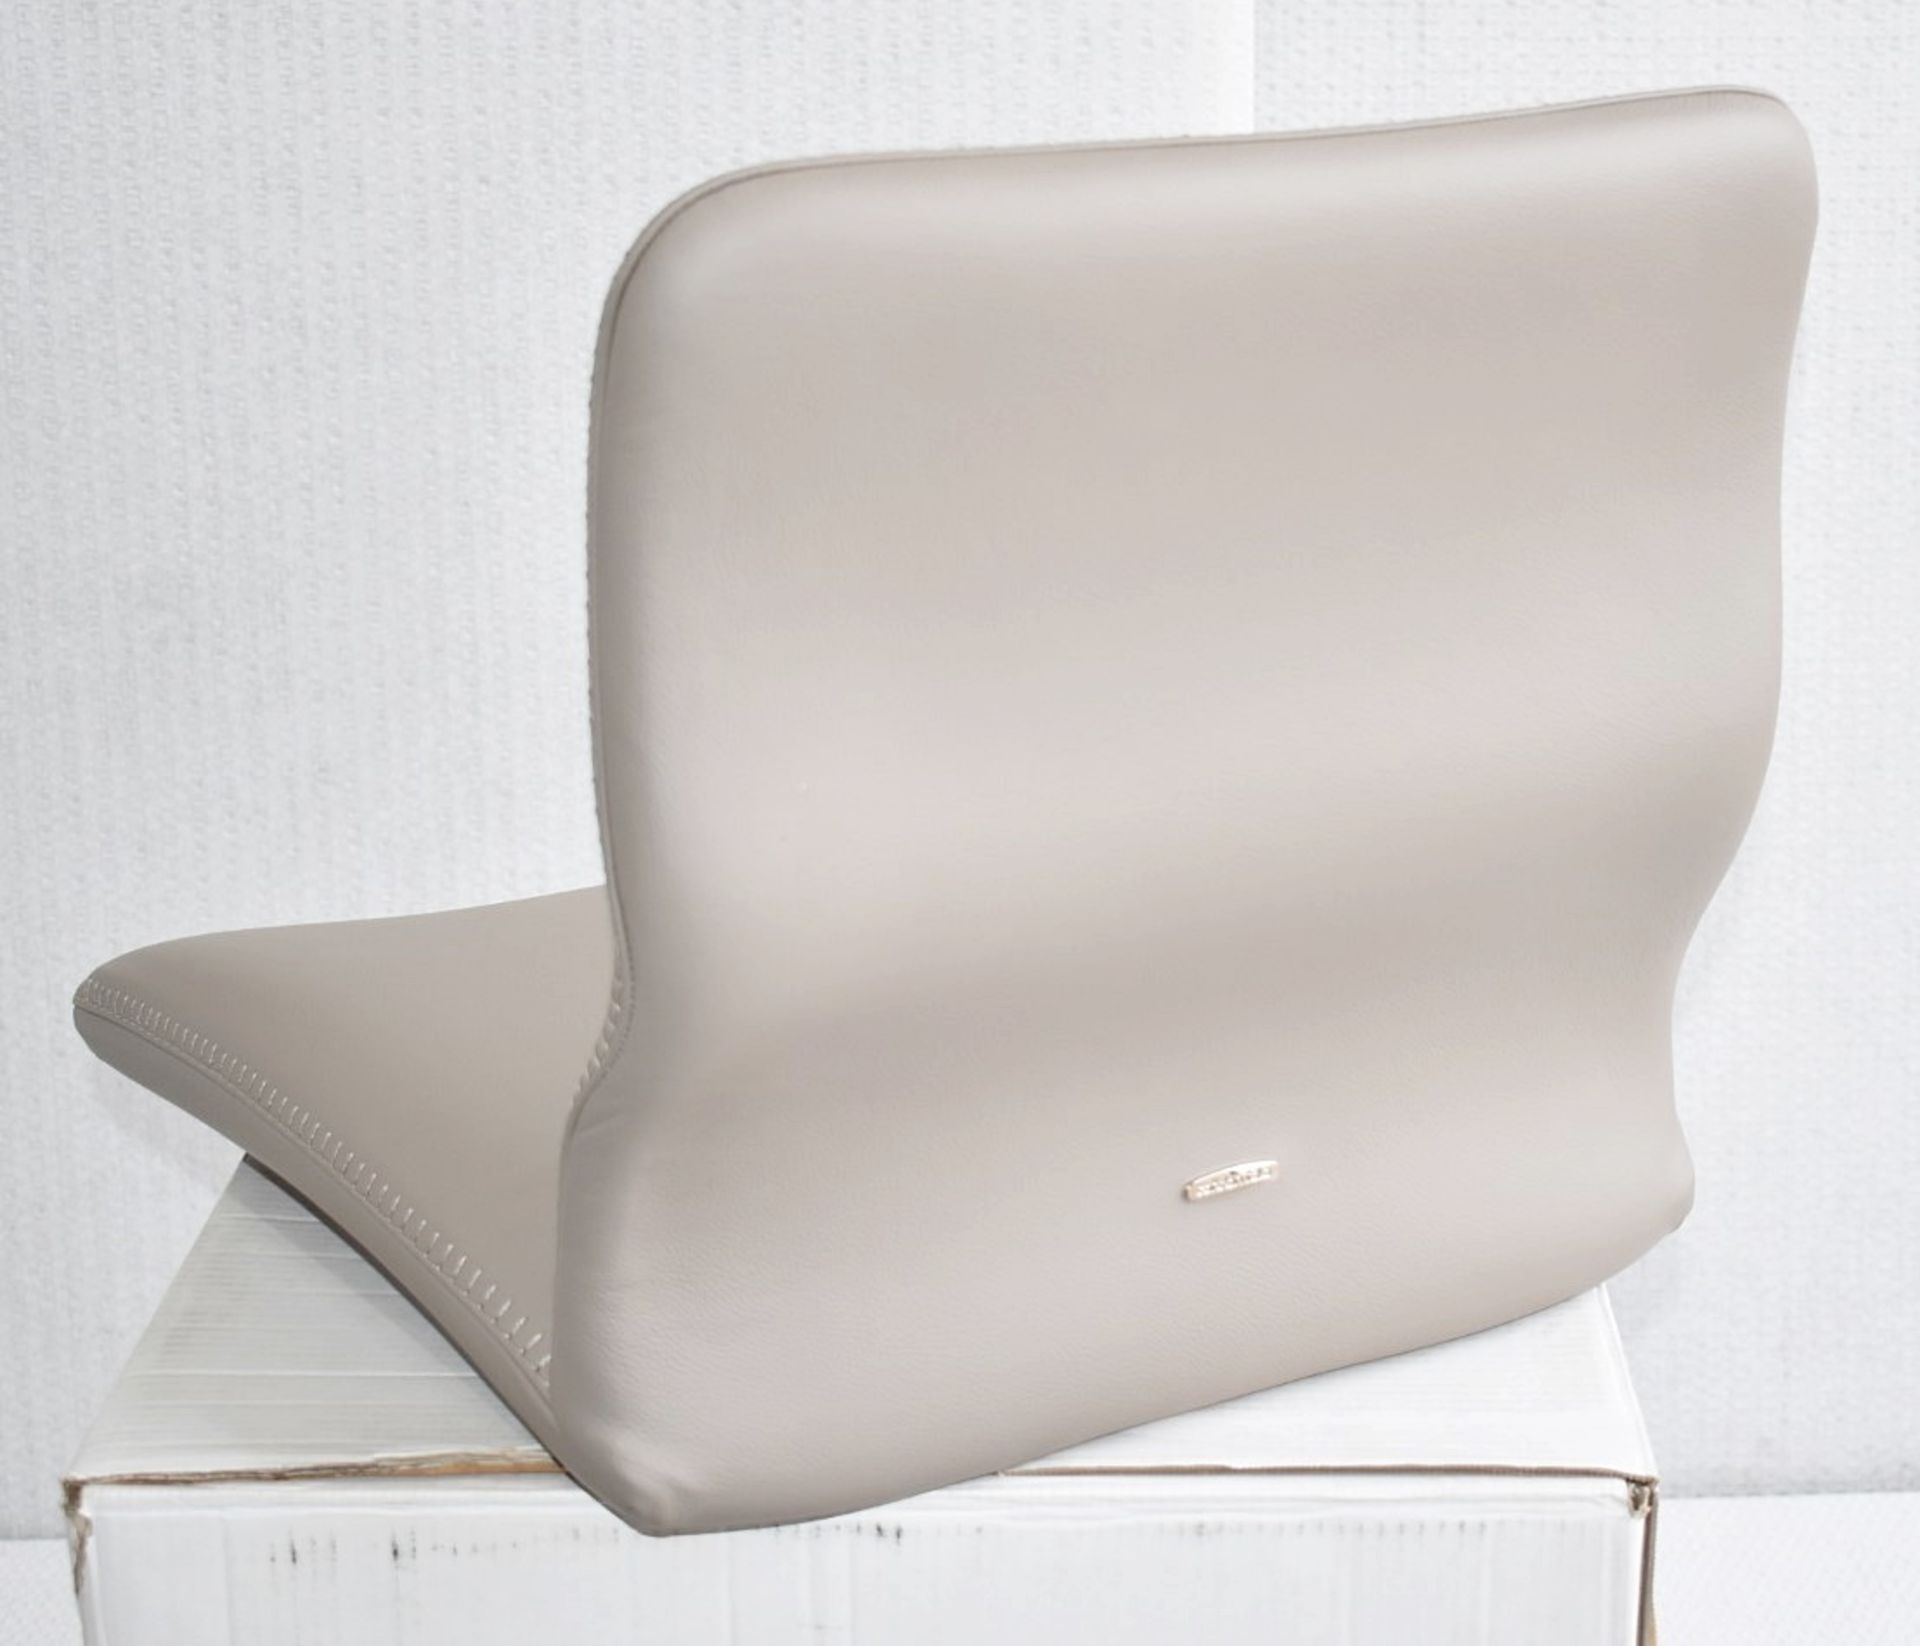 1 x CATTELAN ITALIA Designer Leather Upholstered Seat For Victor Stool, in Light Taupe - Image 2 of 7